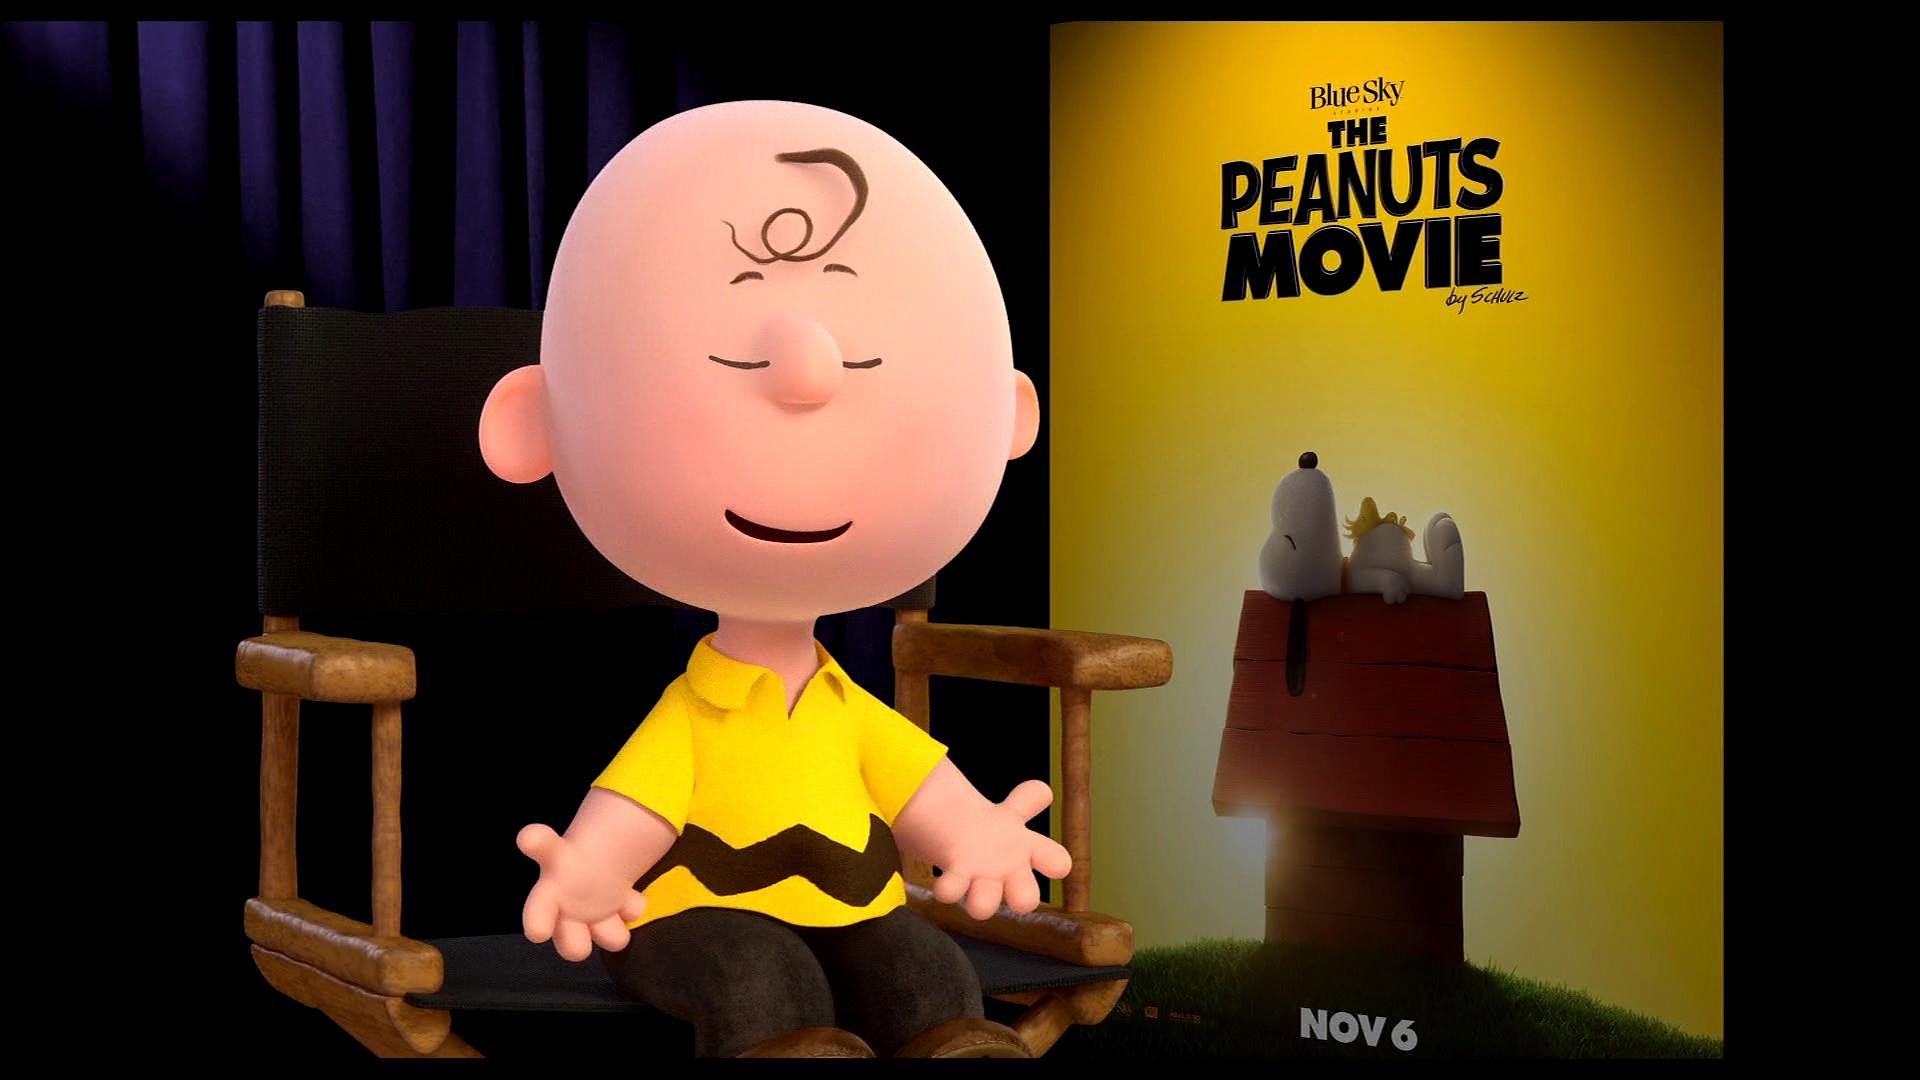 Charlie Brown and Snoopy on their latest film - BBC News